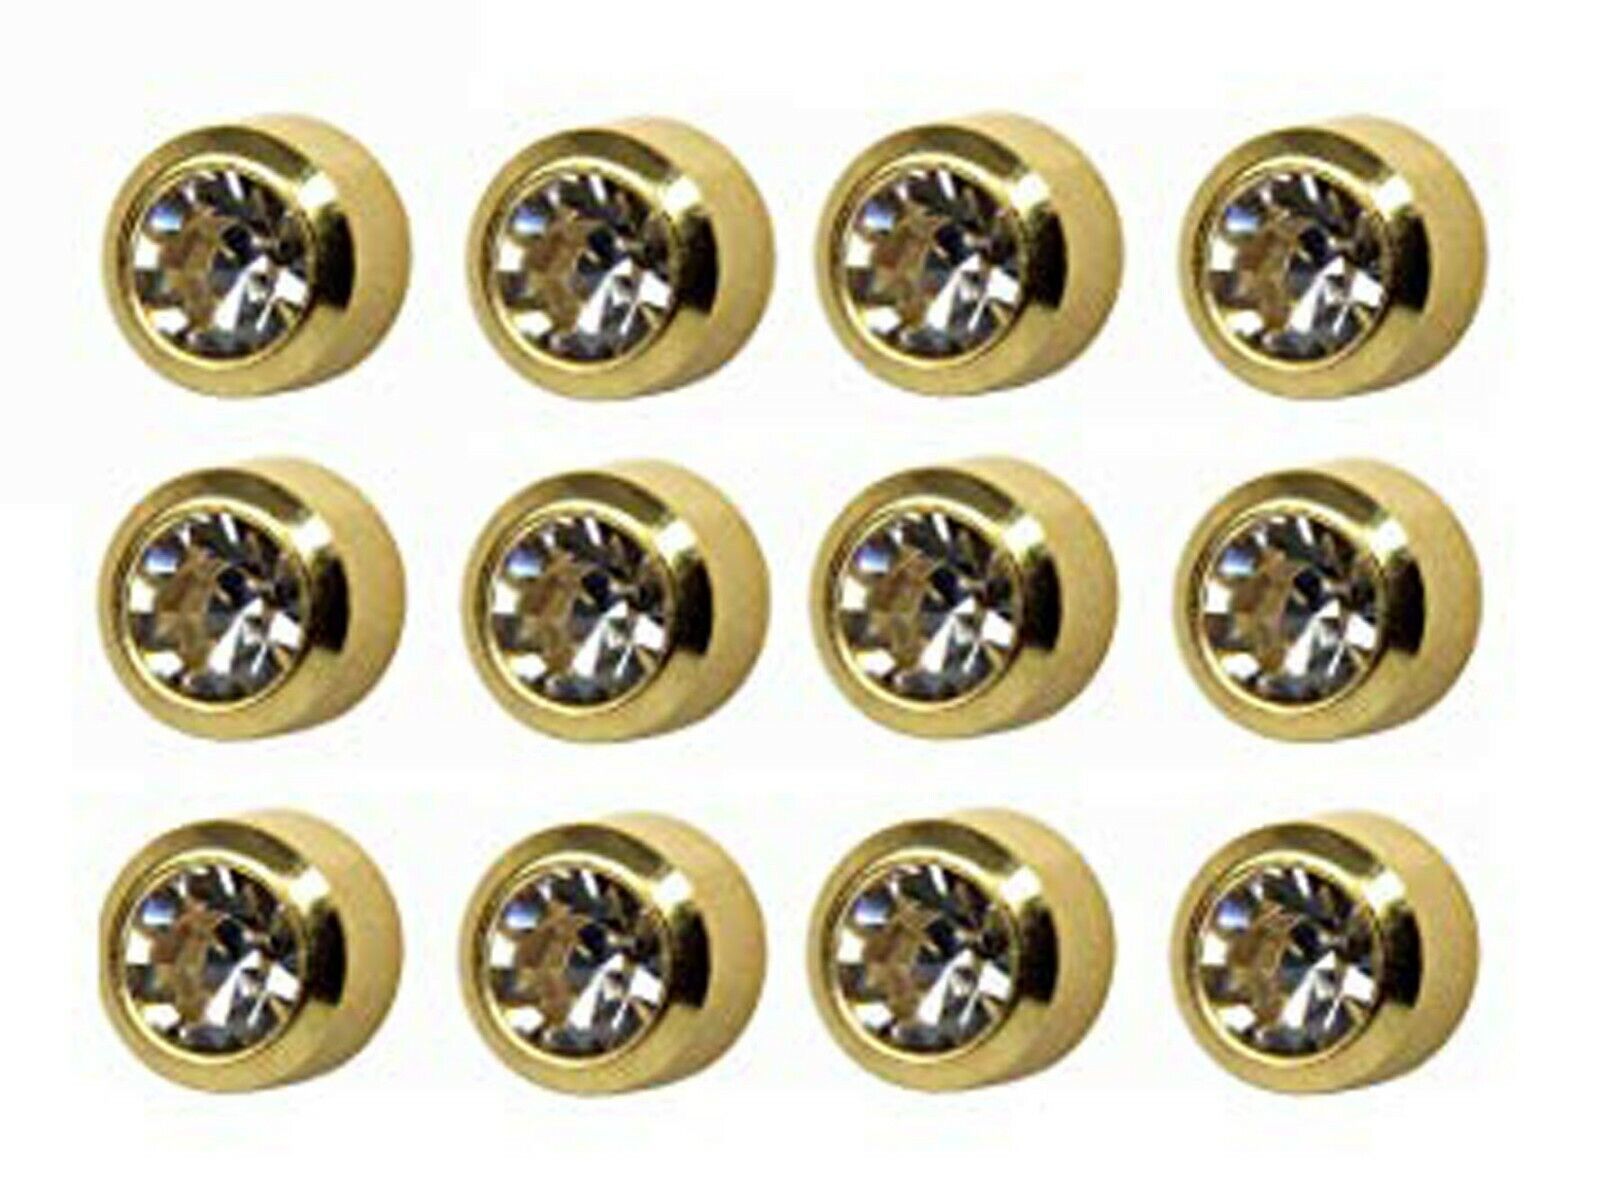 Primary image for Caflon Surgical Mini 3mm Ear piercing Earrings studs 12 pair April Diamond Gold